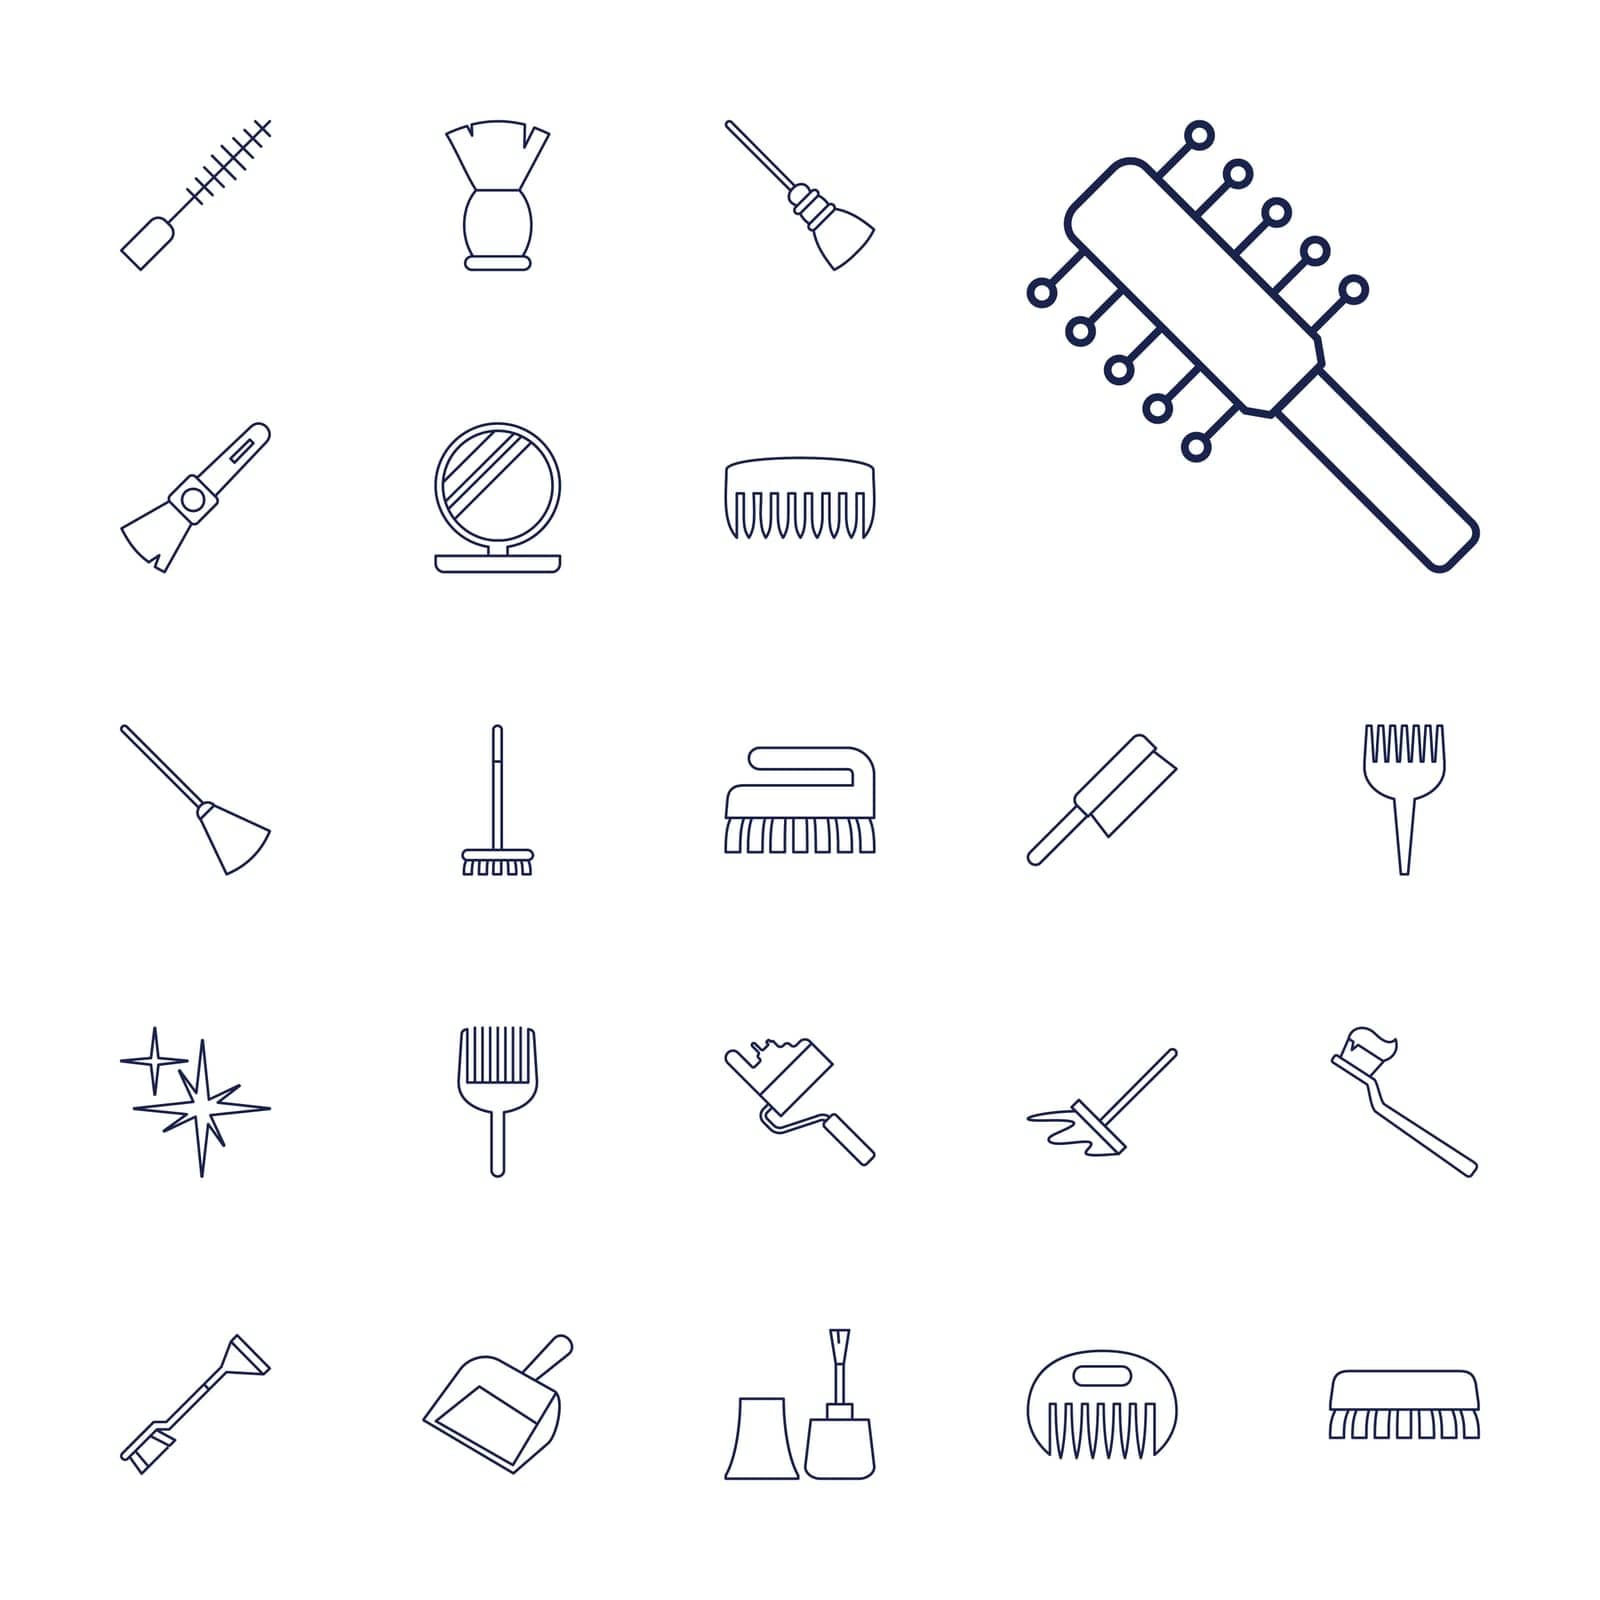 symbol,beauty,icon,sign,isolated,toothbrush,dustpan,powder,mop,hair,white,hygiene,design,coloring,vector,barber,graphic,tooth,brush,set,nail,work,broom,equipment,shaving,clean,tool,comb,background,style,illustration,polish,mascara,roller,object,care